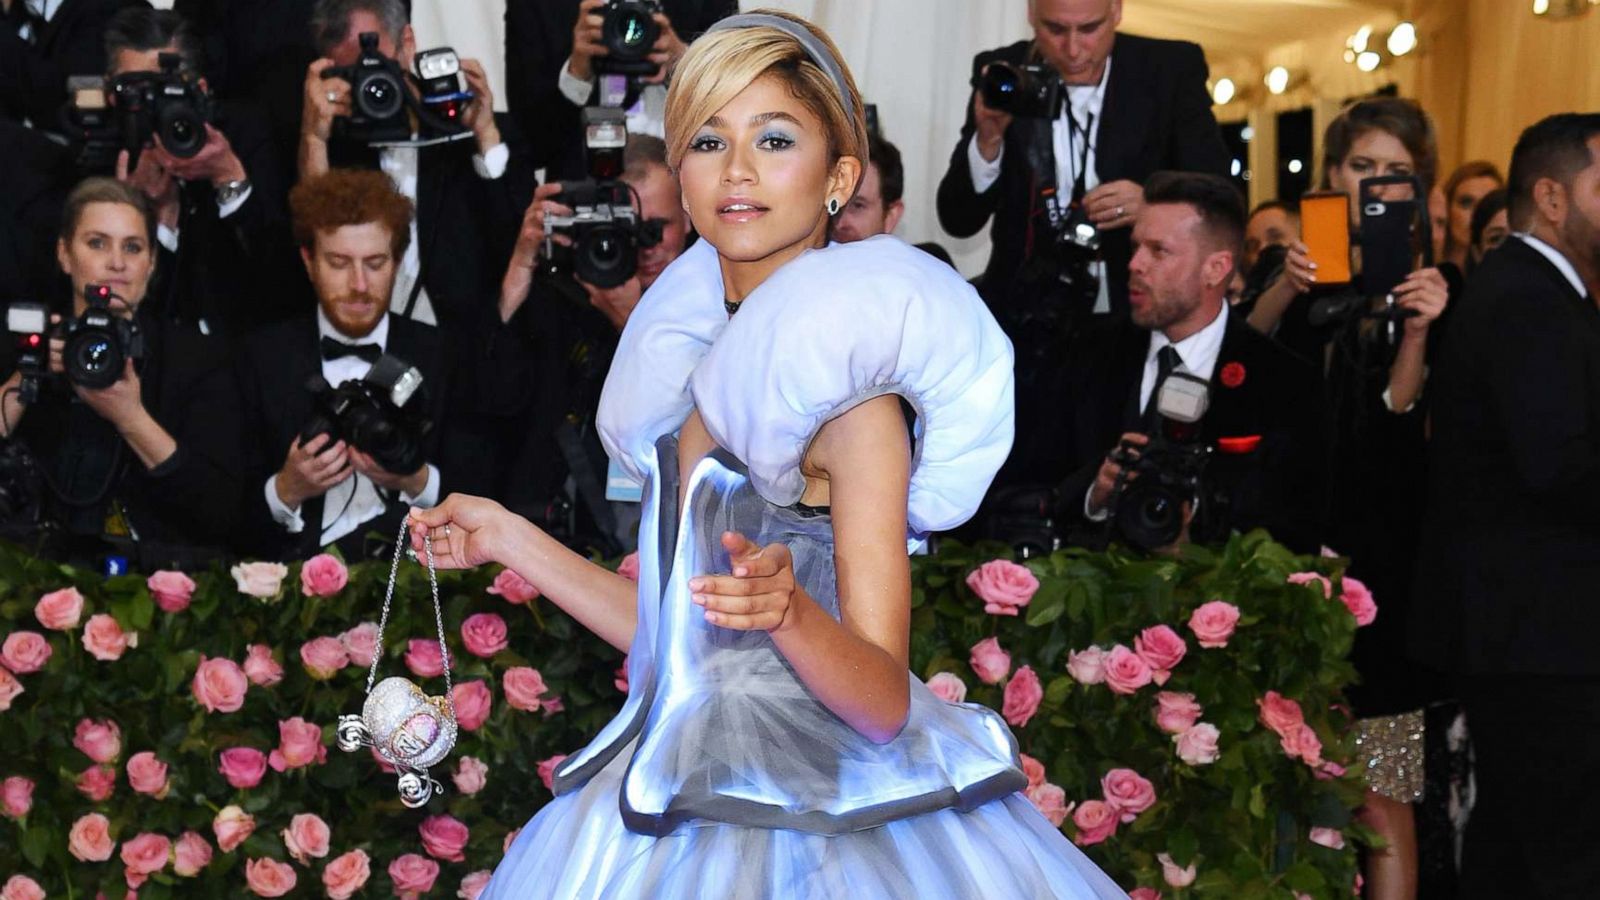 PHOTO: Zendaya attends the 2019 Met Gala Celebrating Camp: Notes on Fashion at the Metropolitan Museum of Art, May 6, 2019, in New York City.